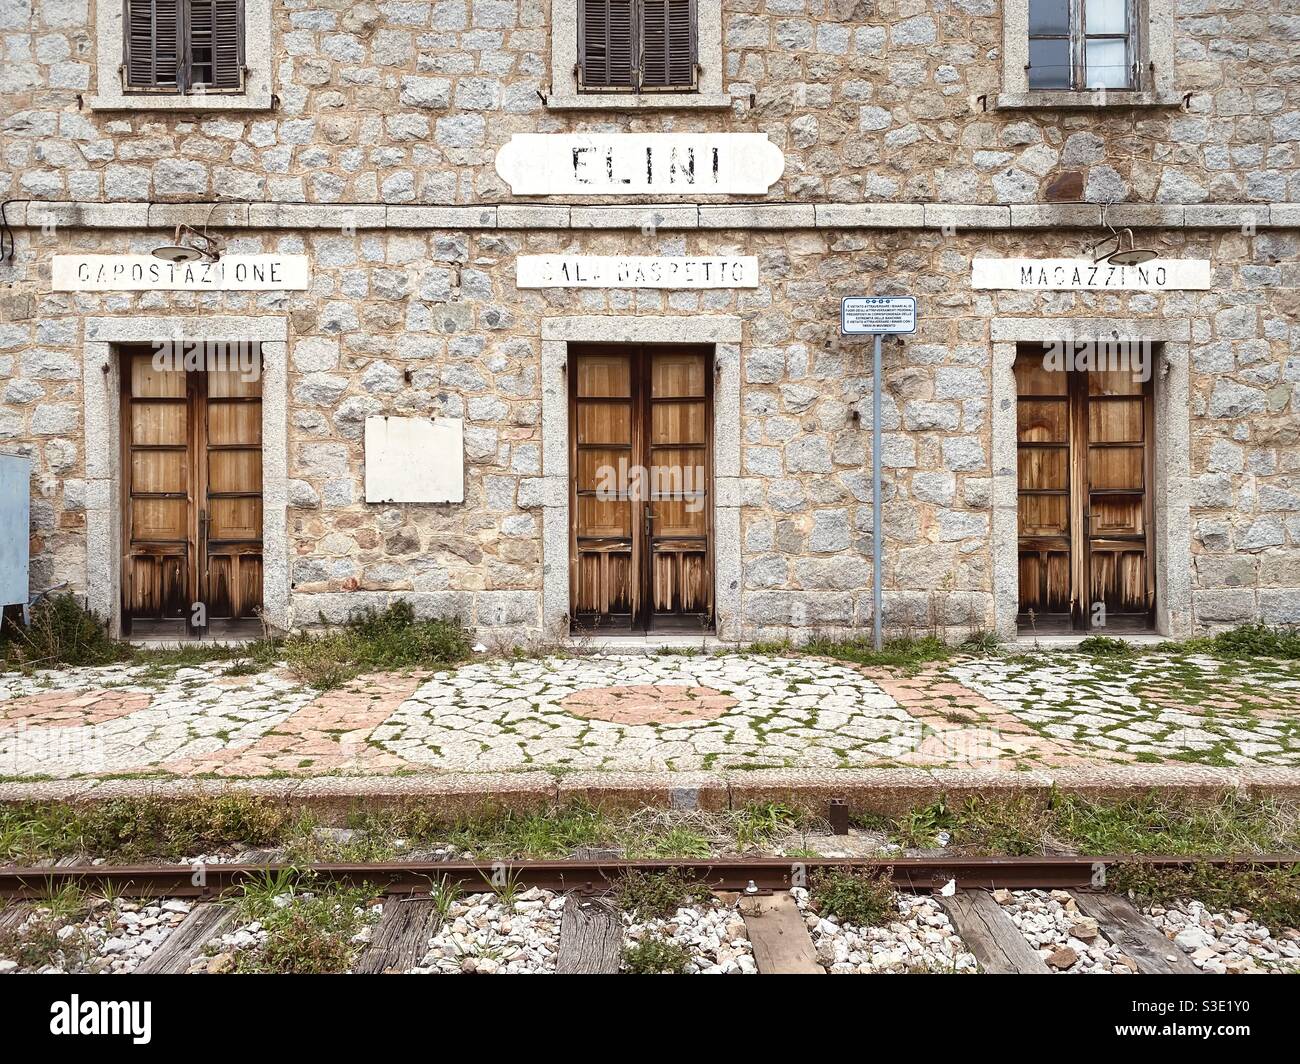 Frontal view of an old, dismissed and abandoned train station with signs written in Italian. Stock Photo